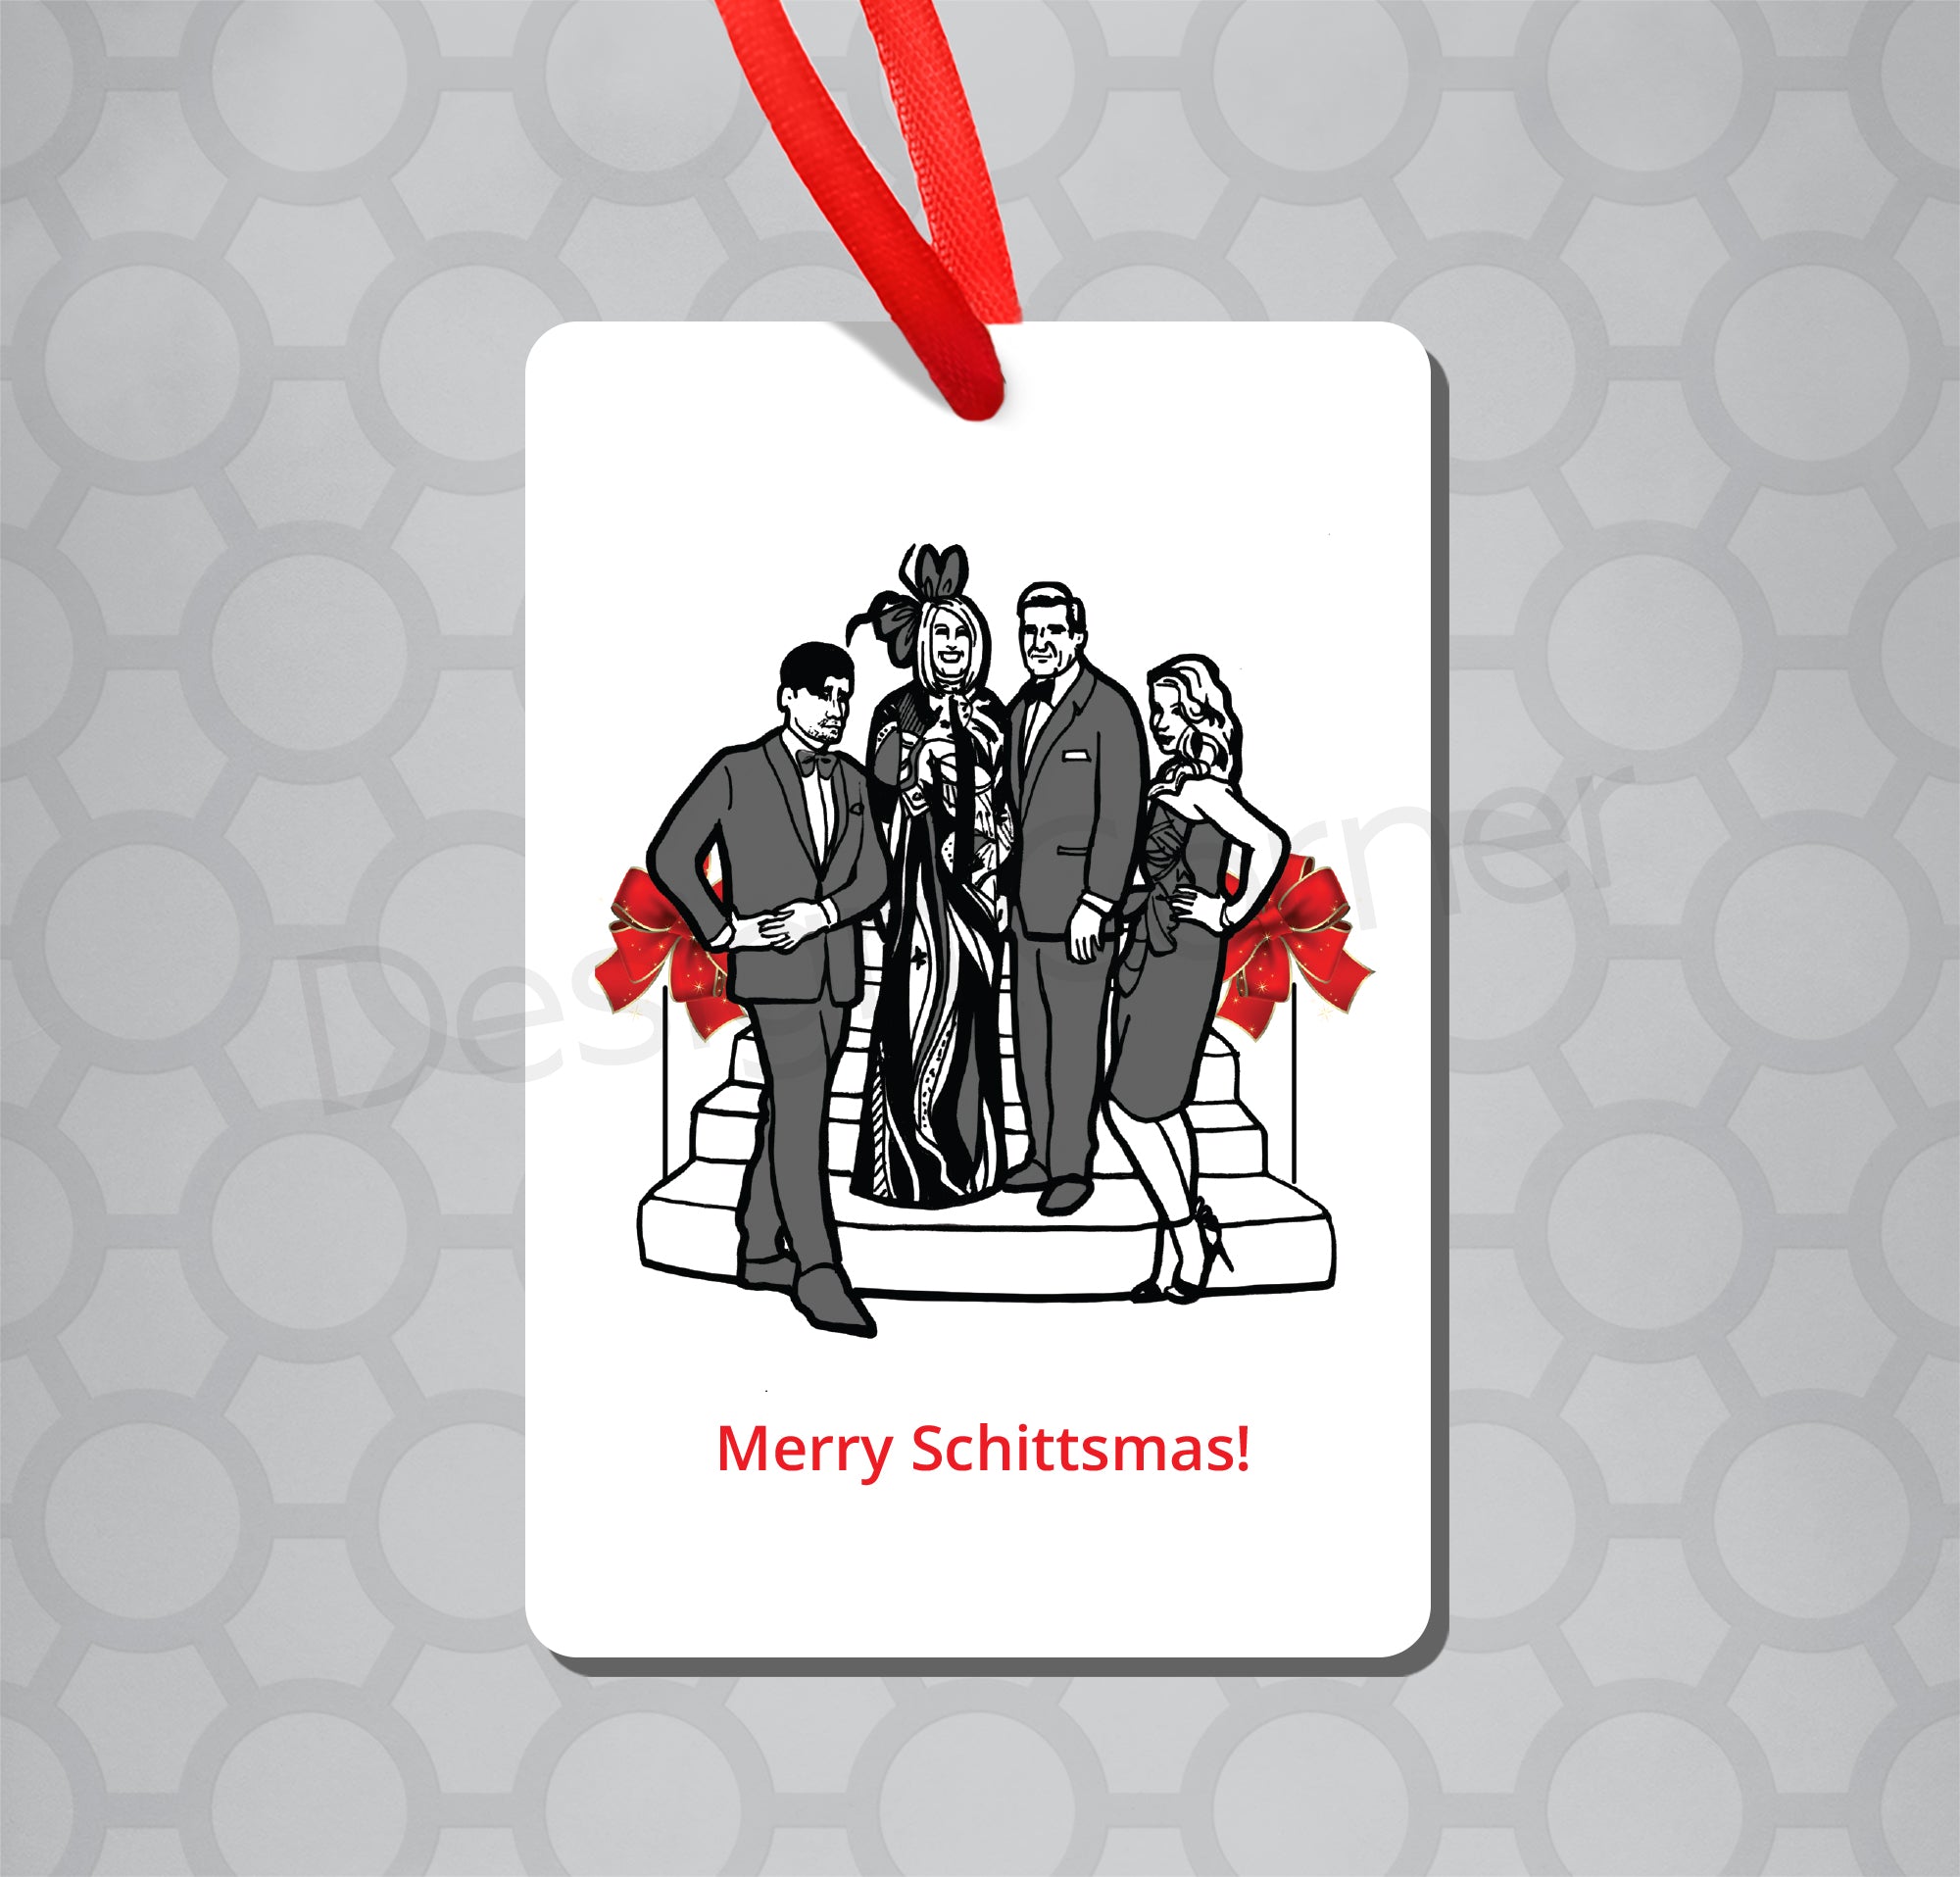 Magnet Ornament with Illustration of Schitts Creek family with caption "Merry Schittsmas"